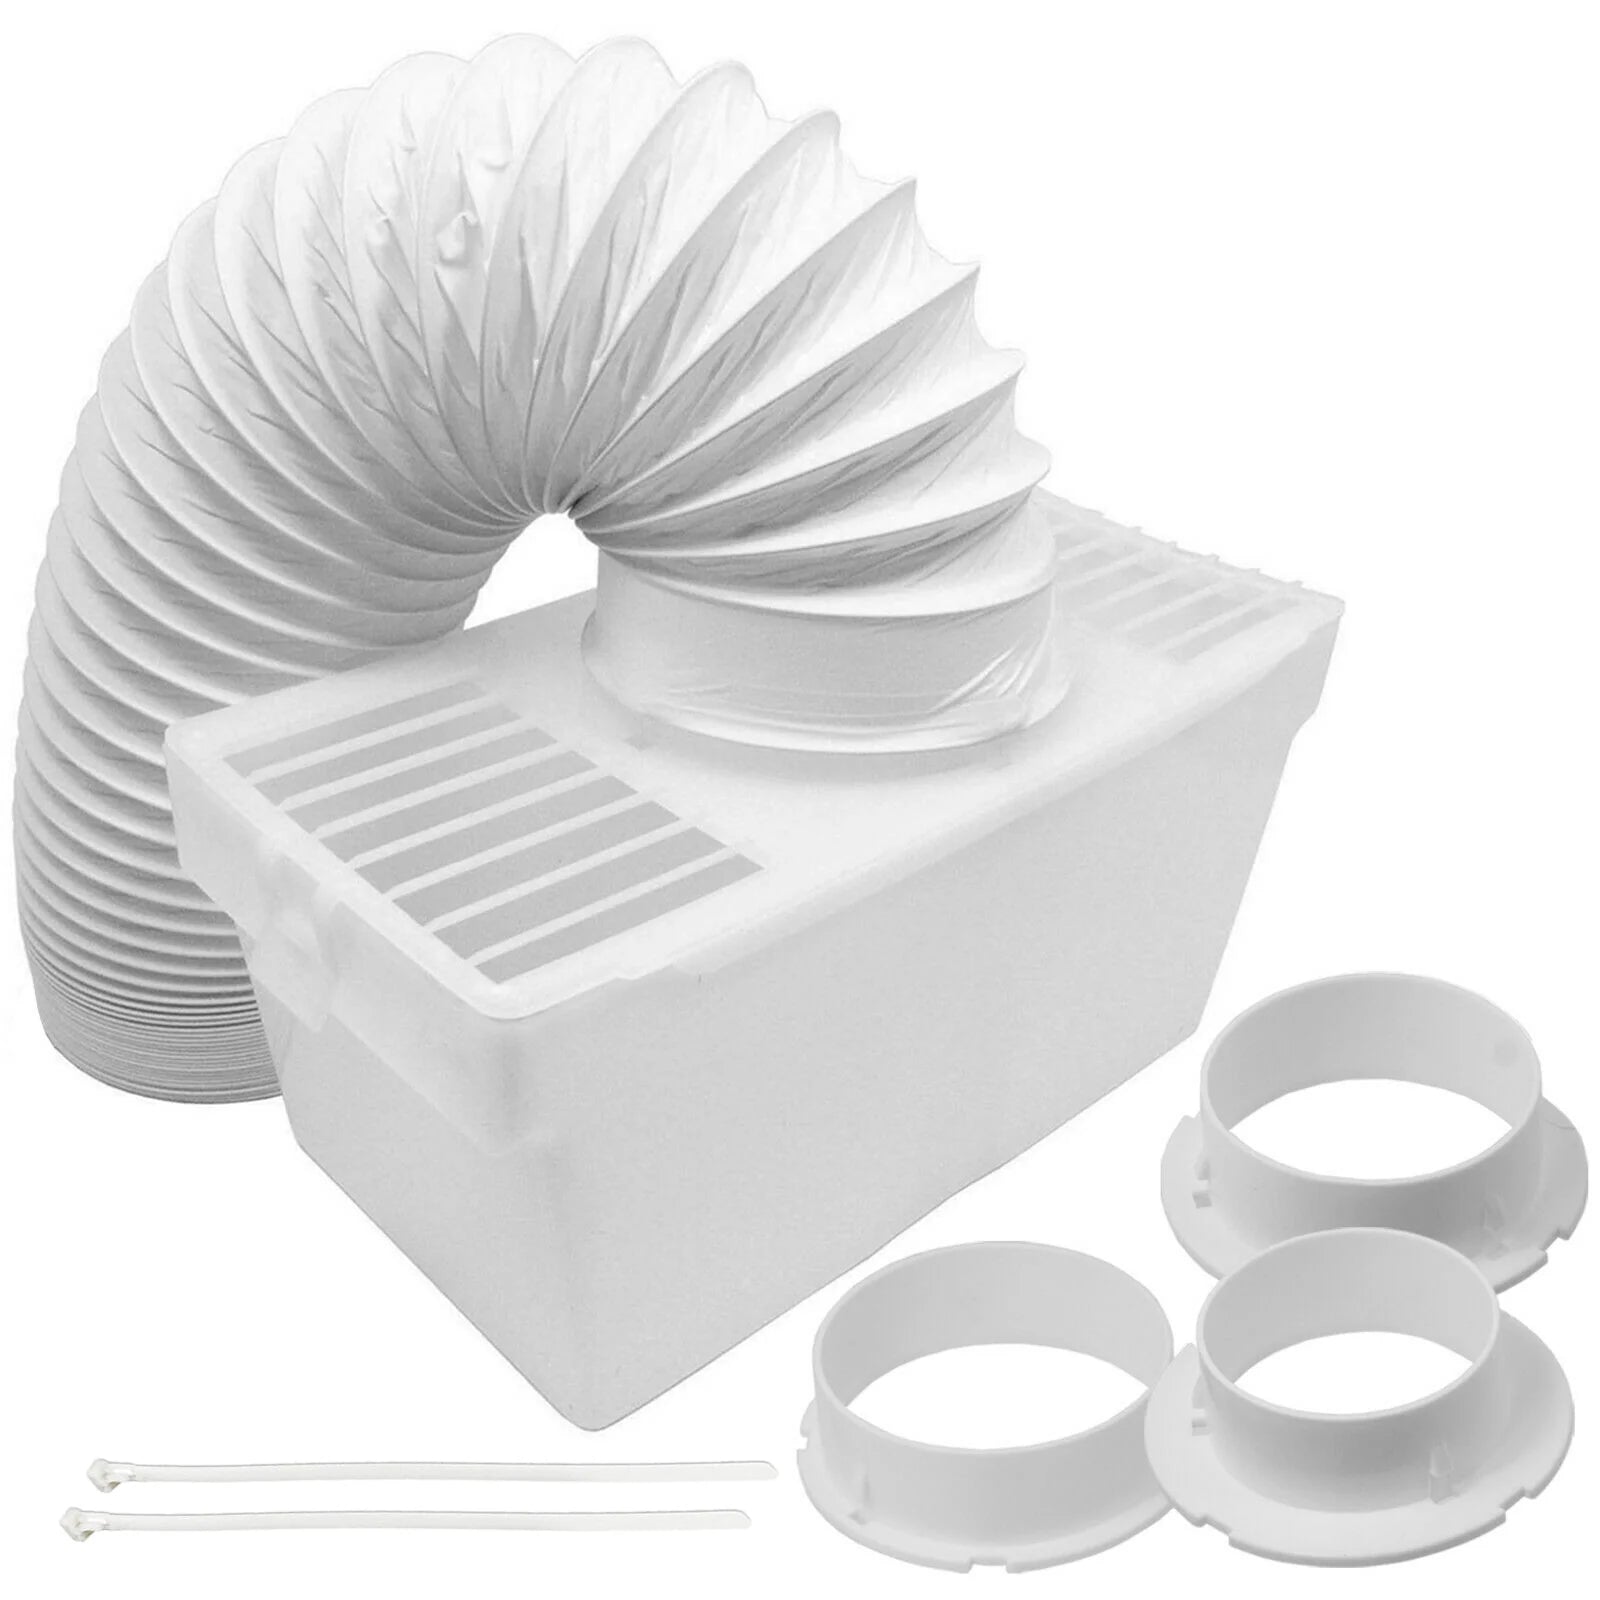 Vent Hose Condenser Kit with 3 x Adaptors for Montpellier Tumble Dryer (1.2m) 0290